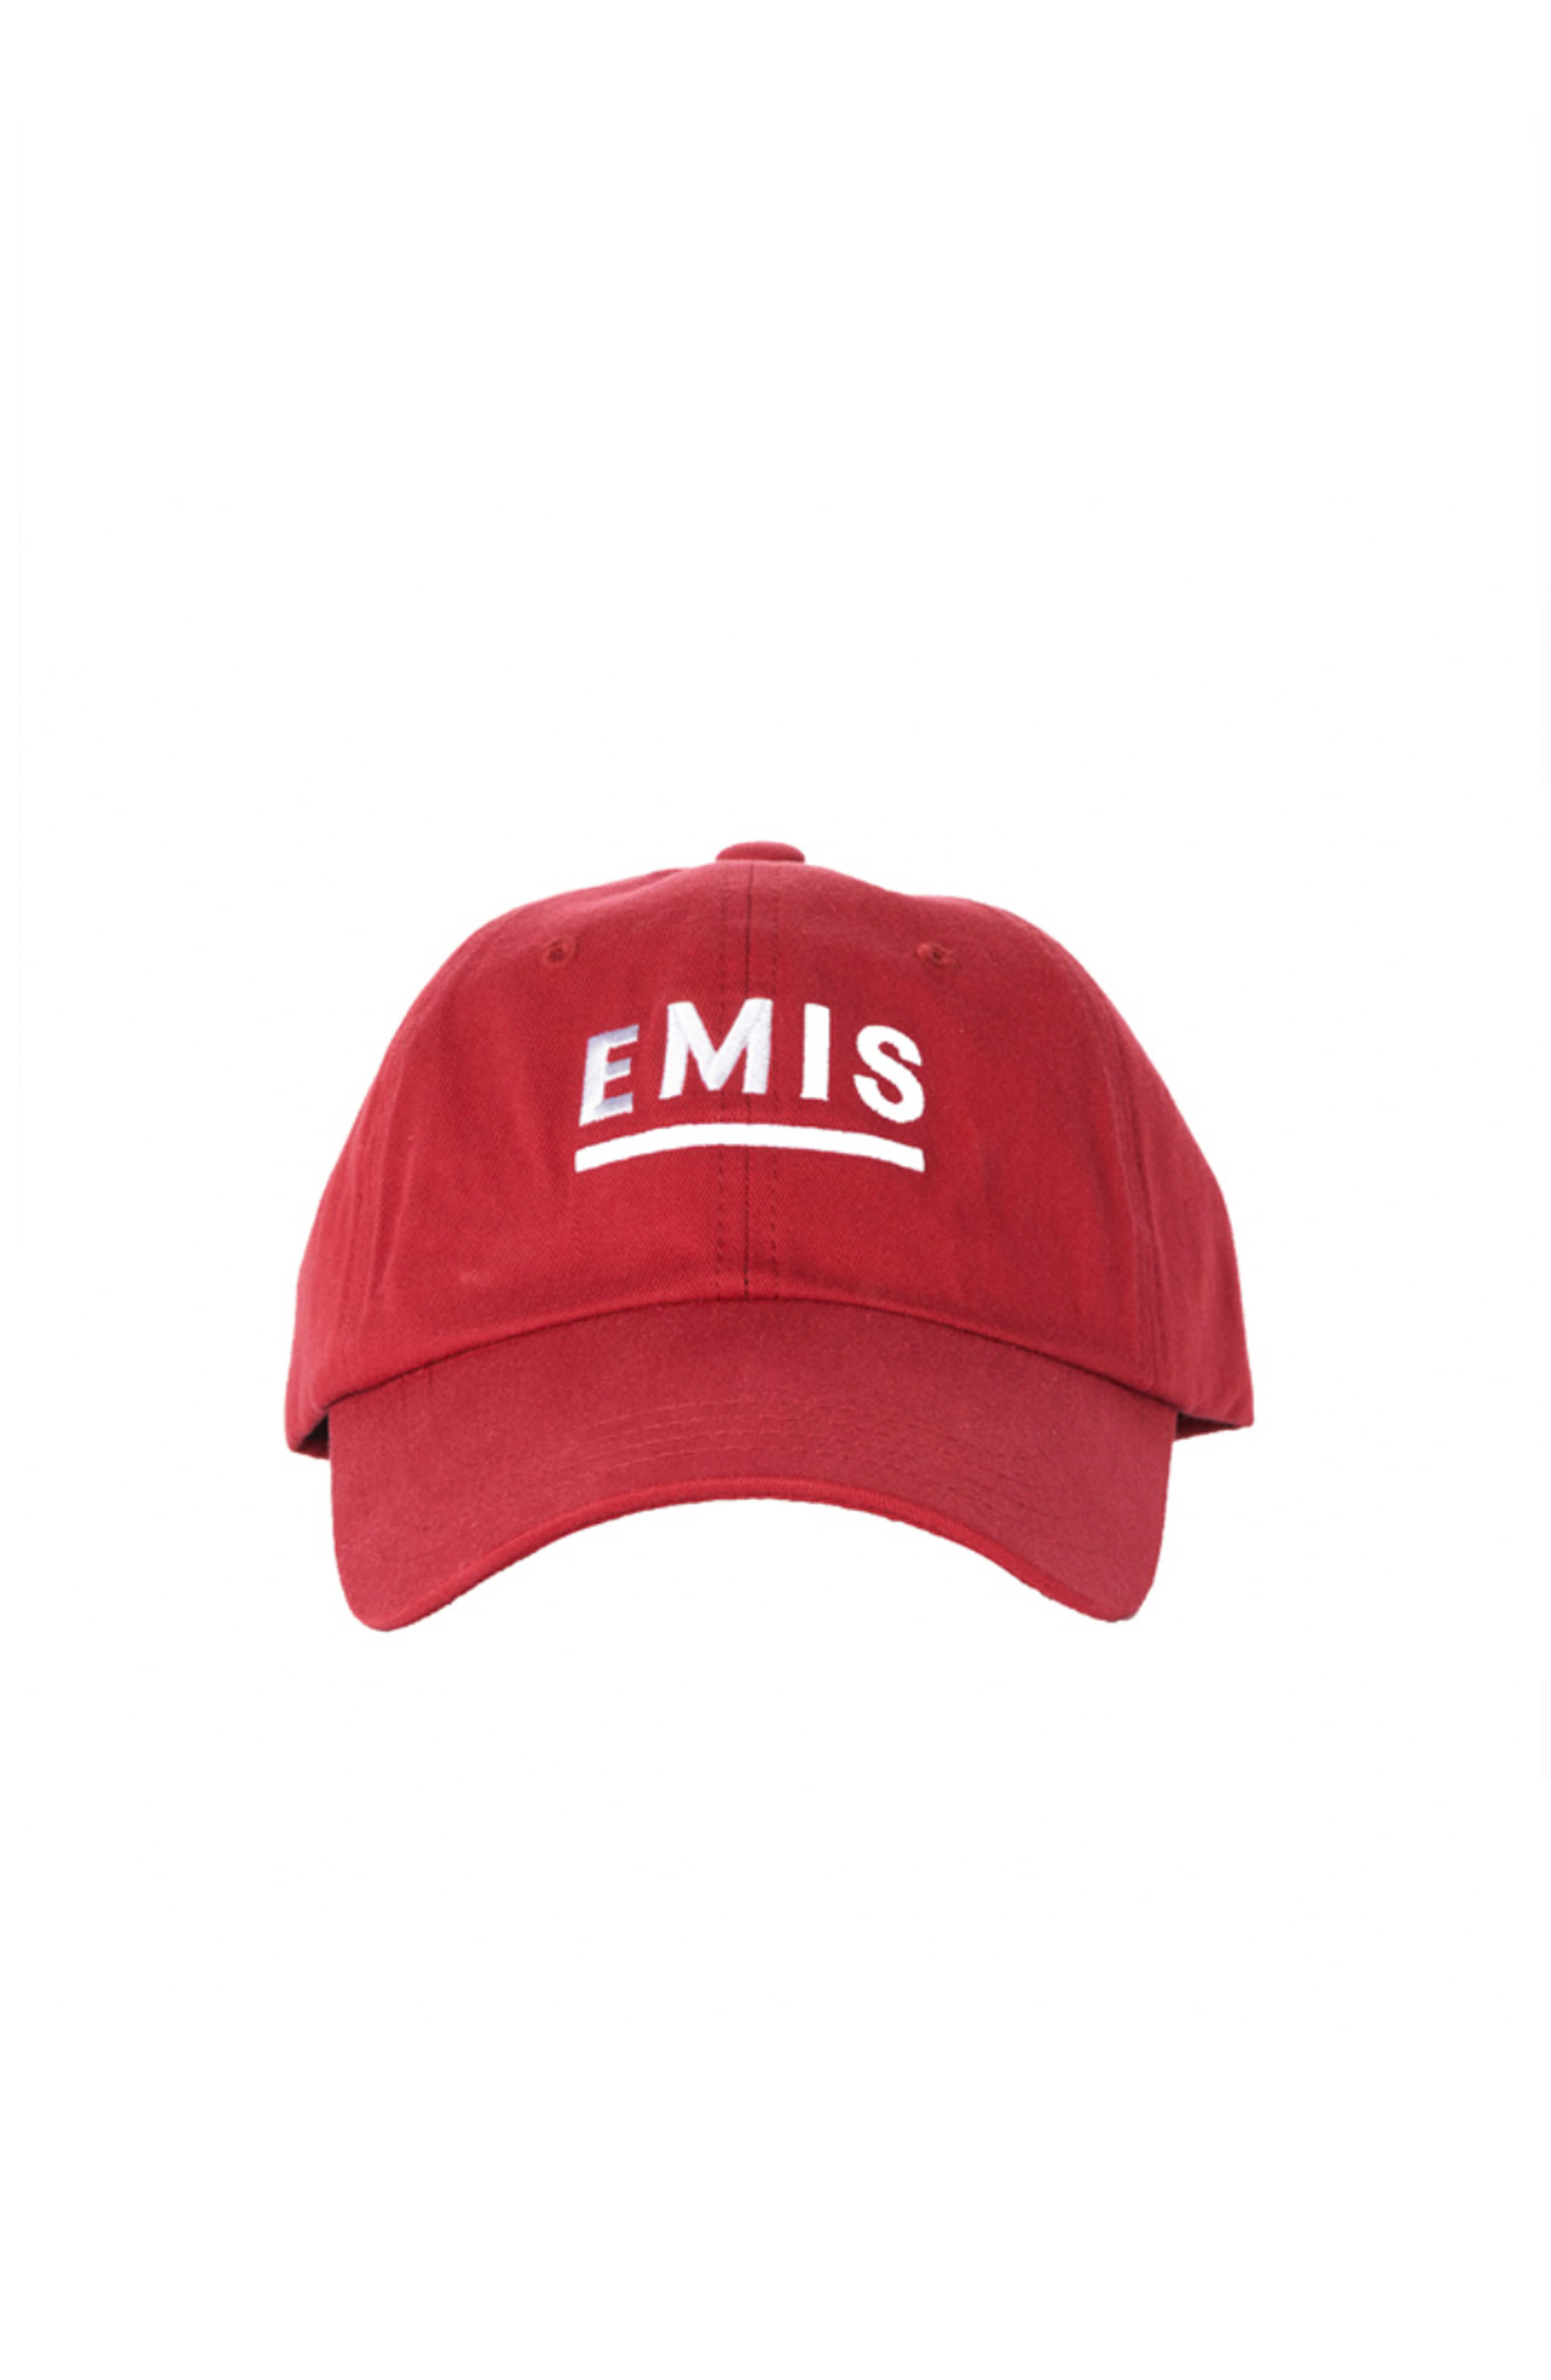 EP11 BALL CAP-RED